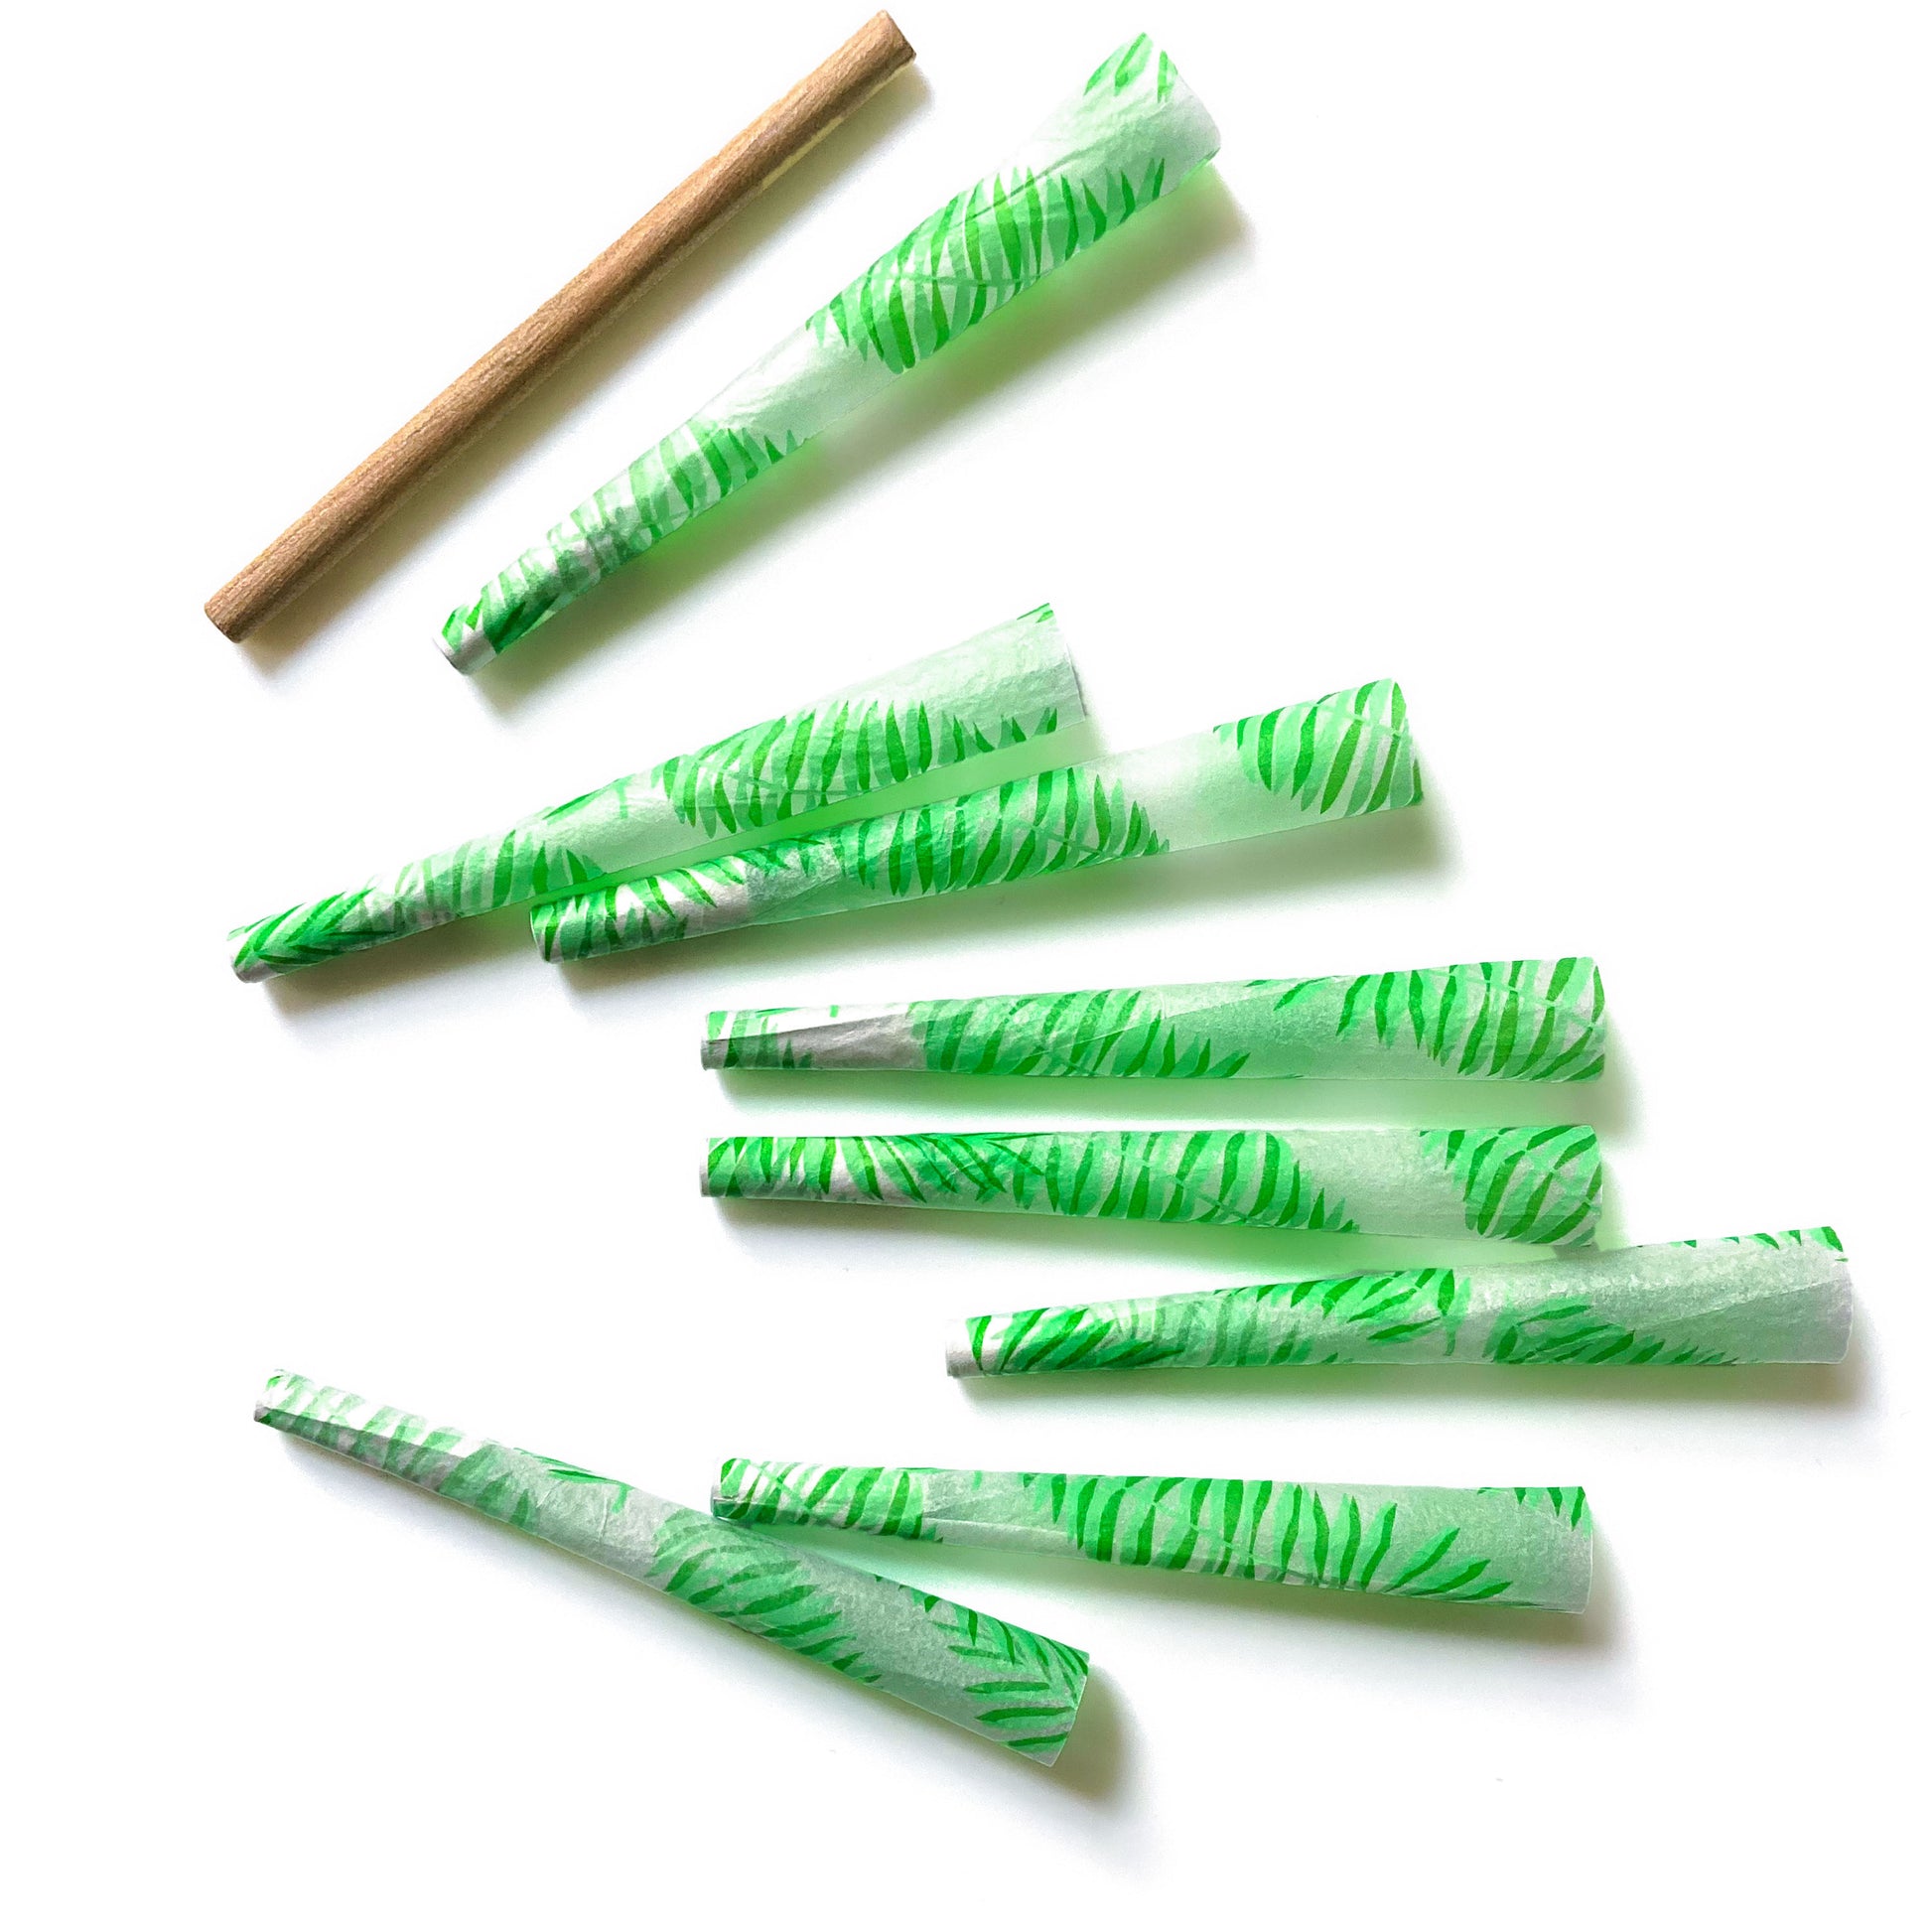 The Flaunt Cones, set of 8: leaf, frond patterned pre-rolled cones. These designer pre-rolled cones are girly, pretty, vegan, cute, cool, standard size, high quality, even burn, natural dyes, best tasting, slow burn.